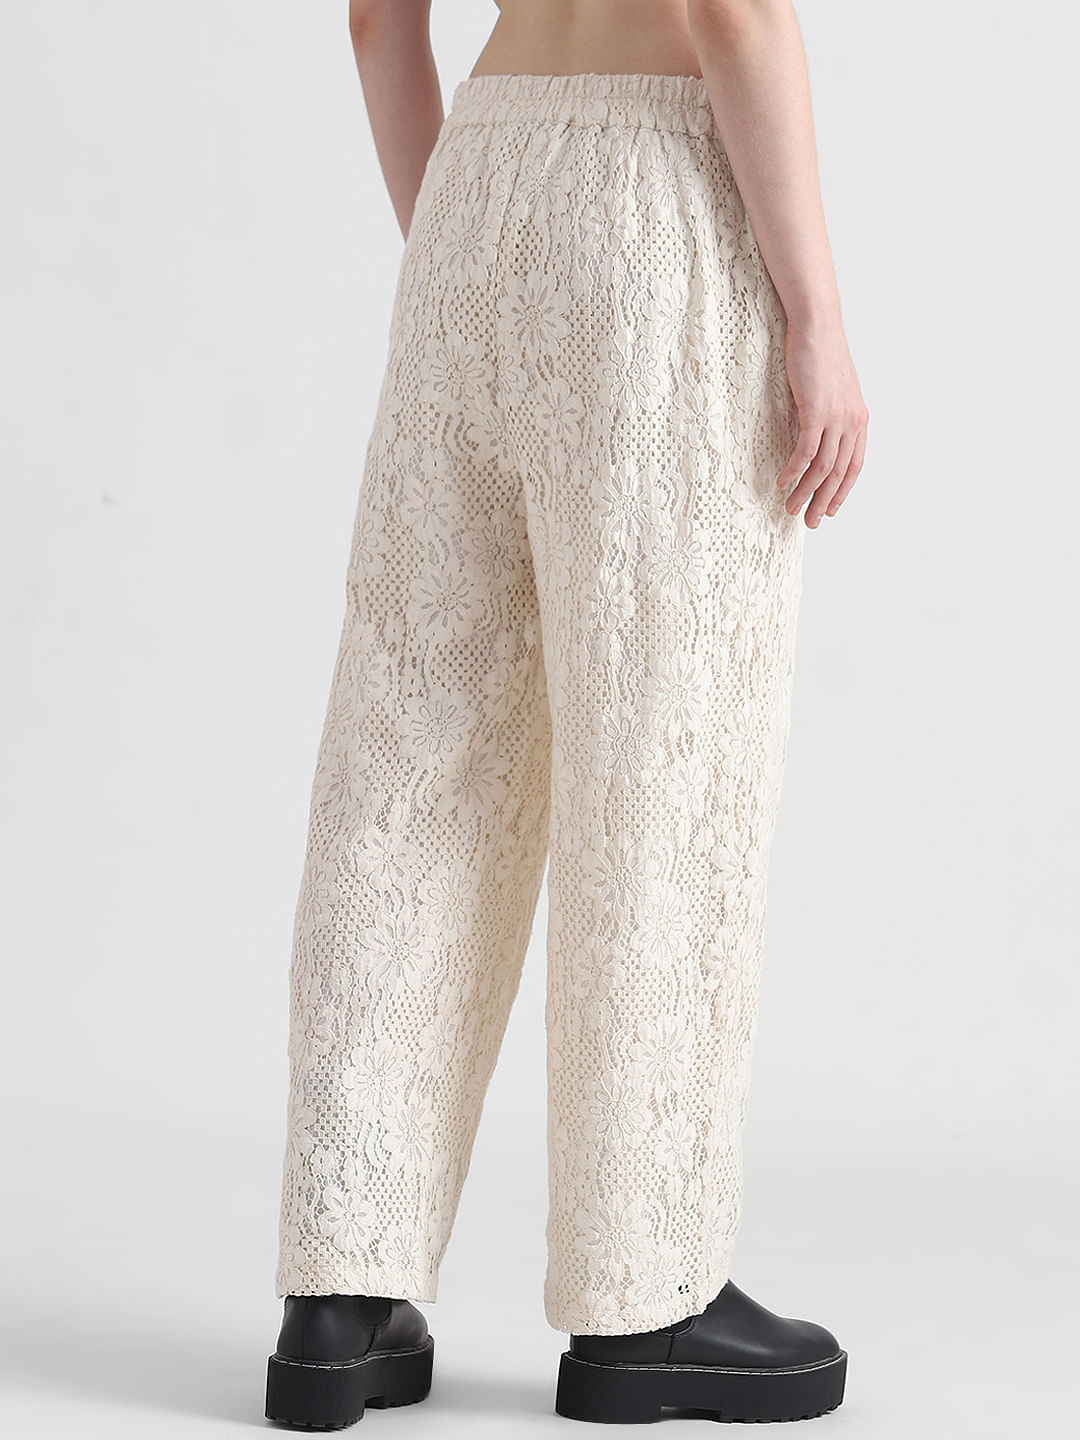 Oversized Lace Mother Of The Elegant Chiffon Pant Suits With Wide Leg  Trousers Formal Wedding Guest Wear From Shangzhu, $54.72 | DHgate.Com